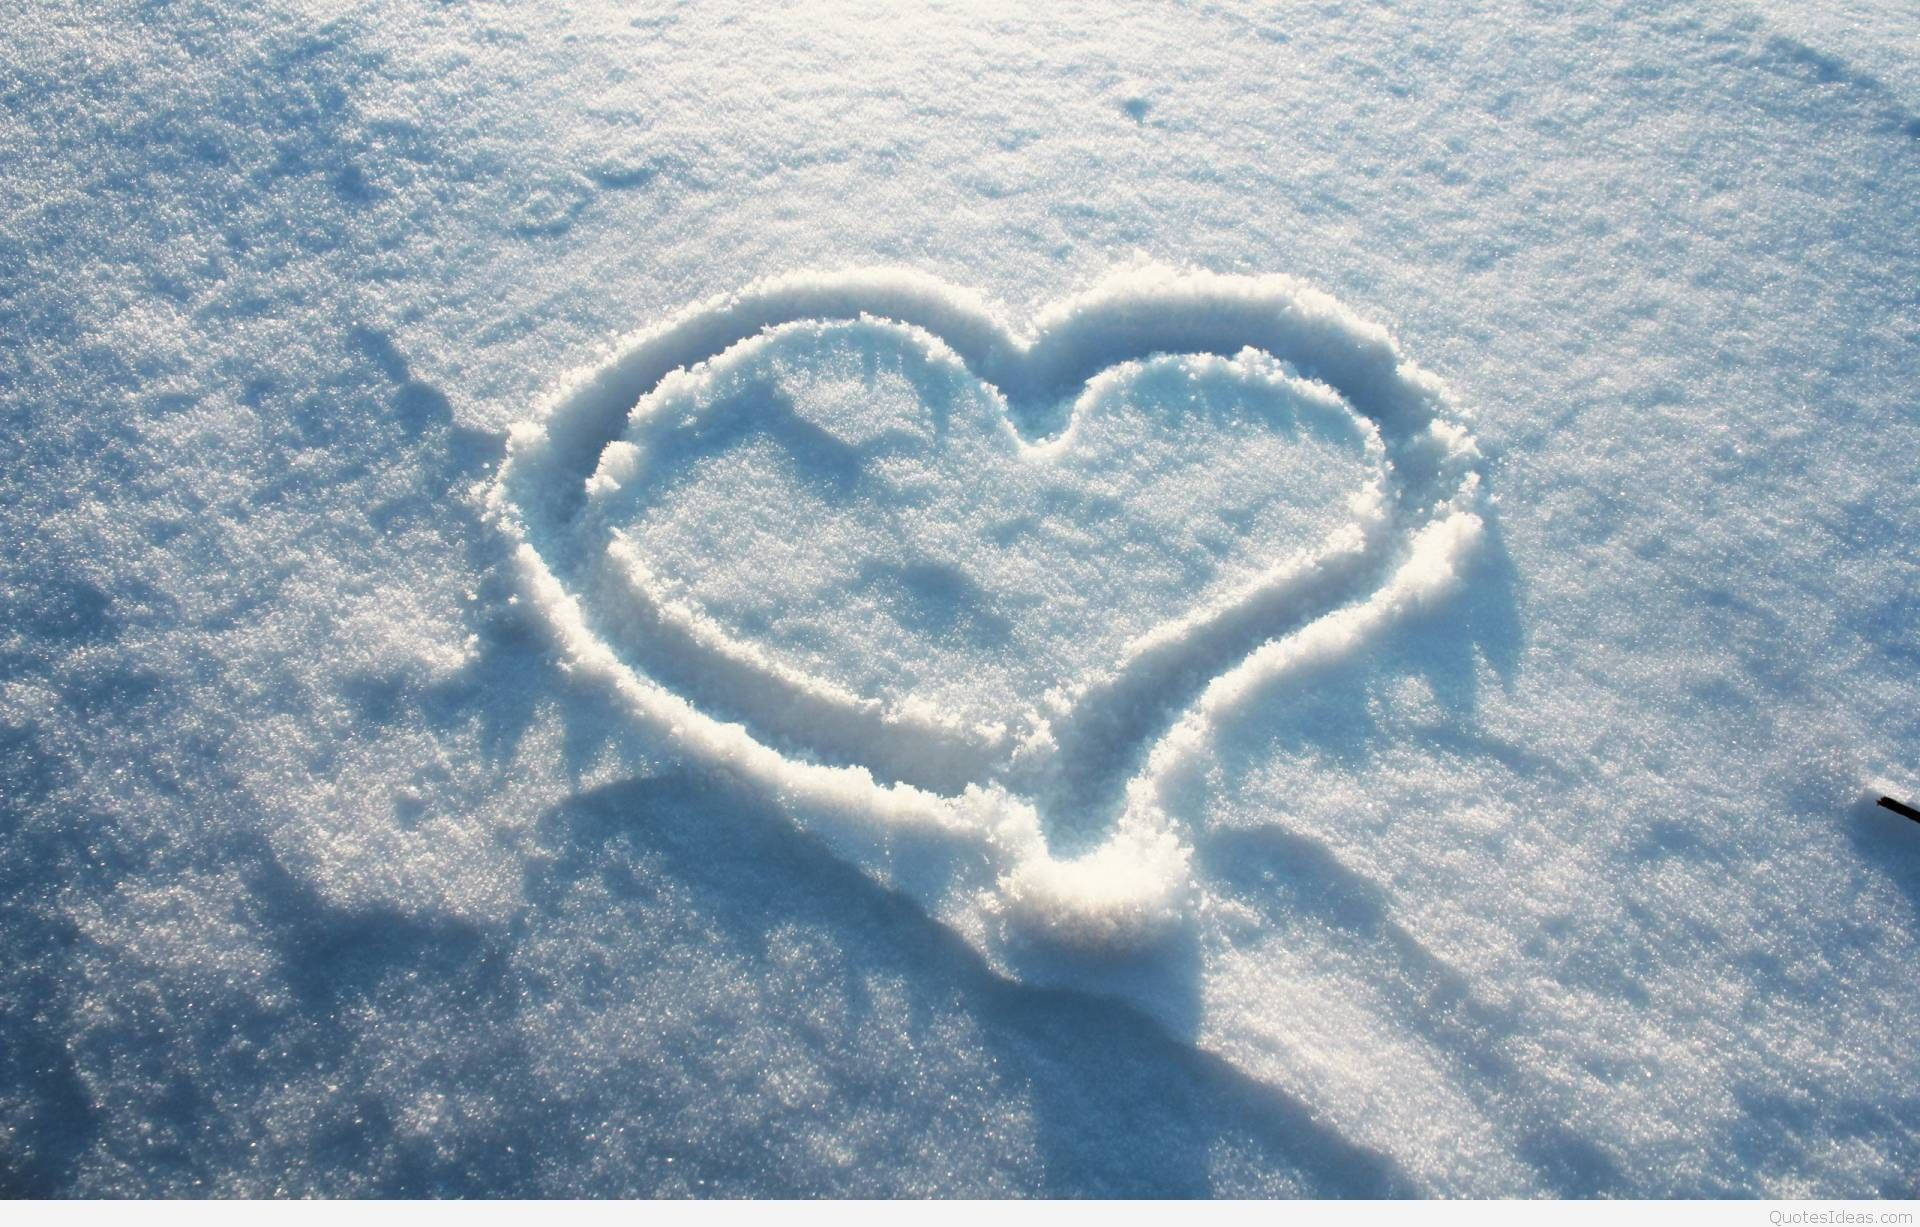 Love Story Message Professed On Snow